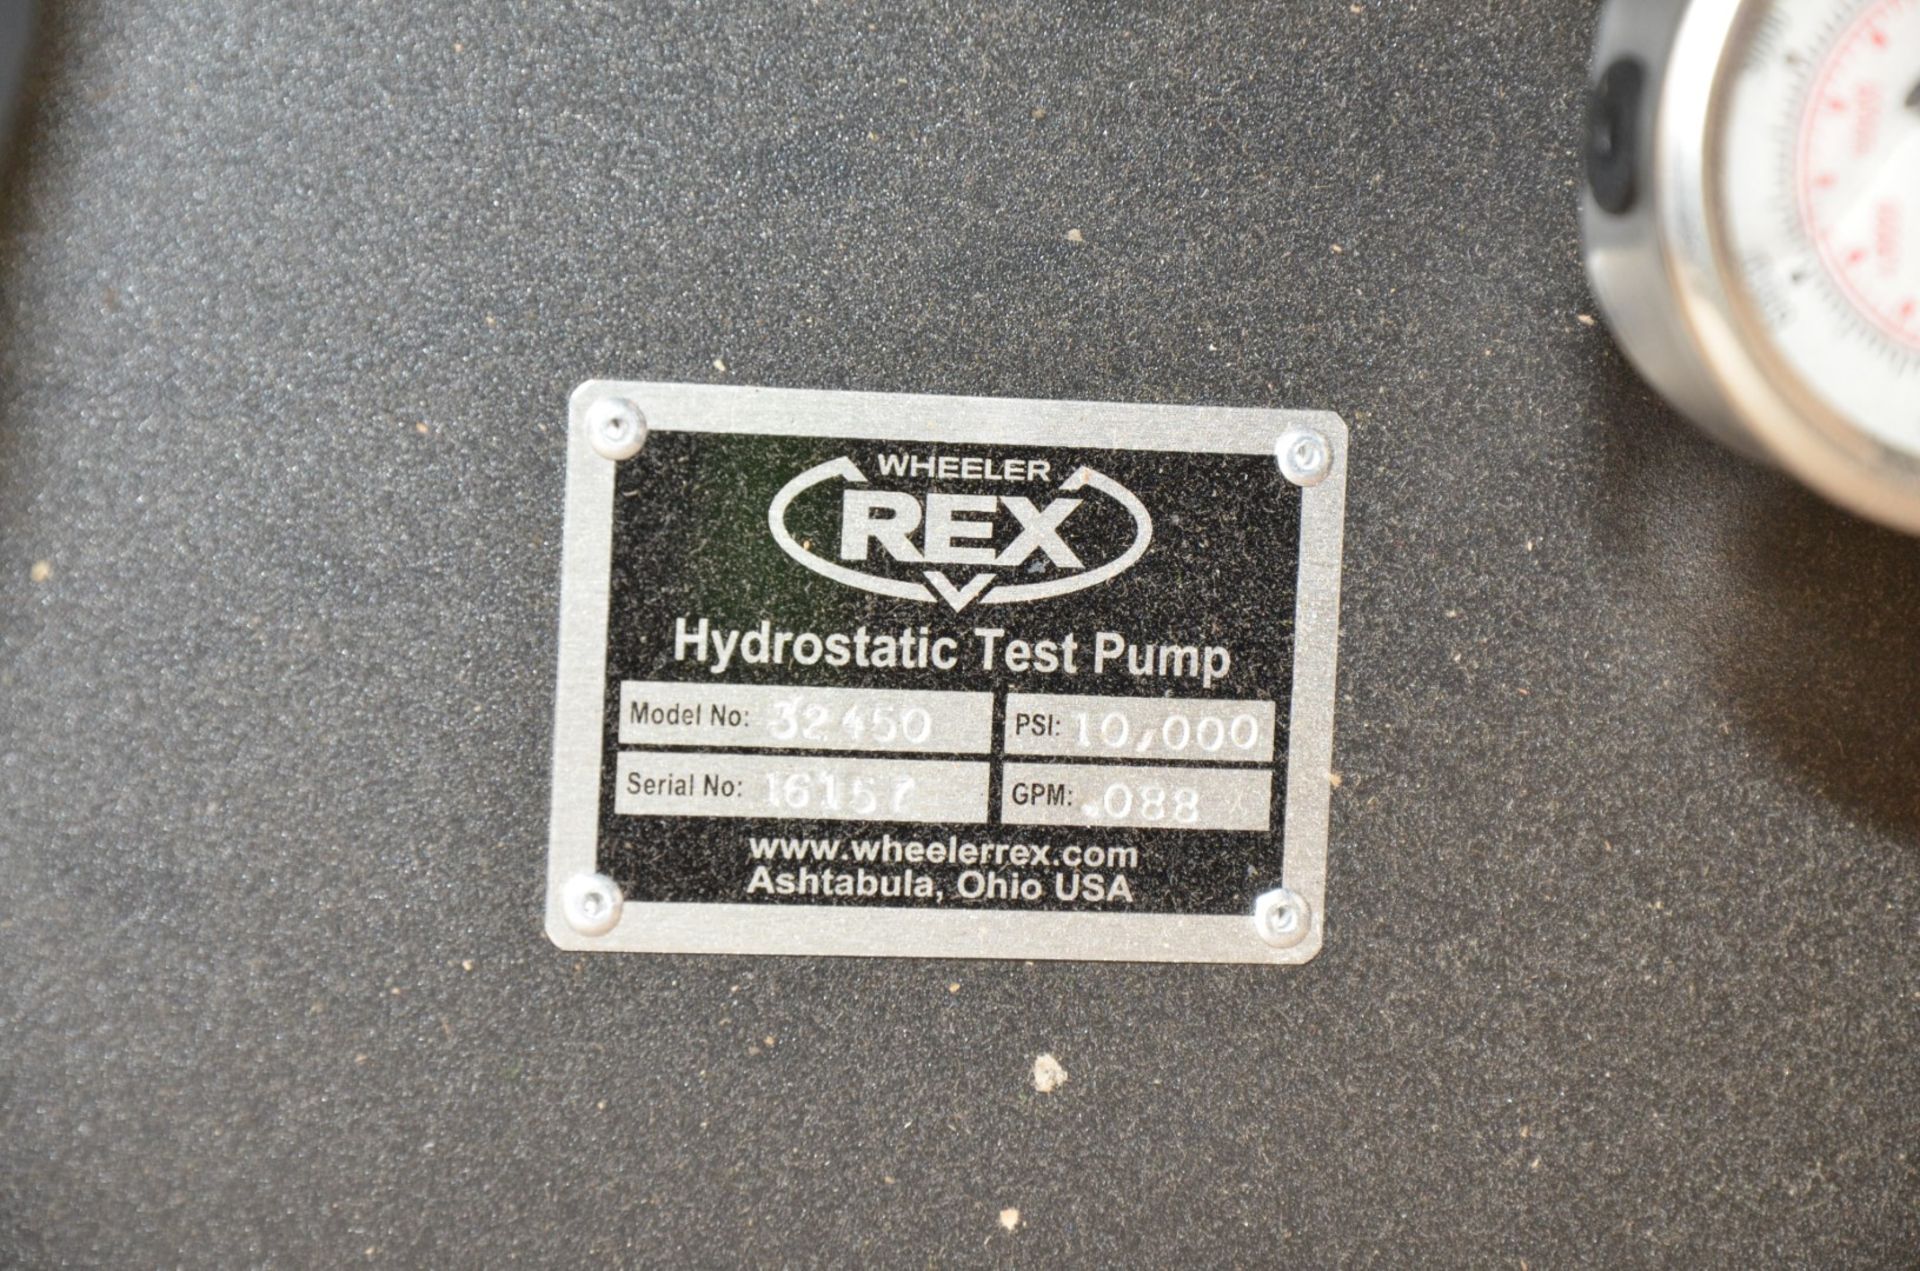 WHEELER REX 32450 HYDROSTATIC TEST PUMP WITH 10,000 PSI CAPACITY, 0.088 GPM, S/N 16157 [RIGGING - Image 3 of 3